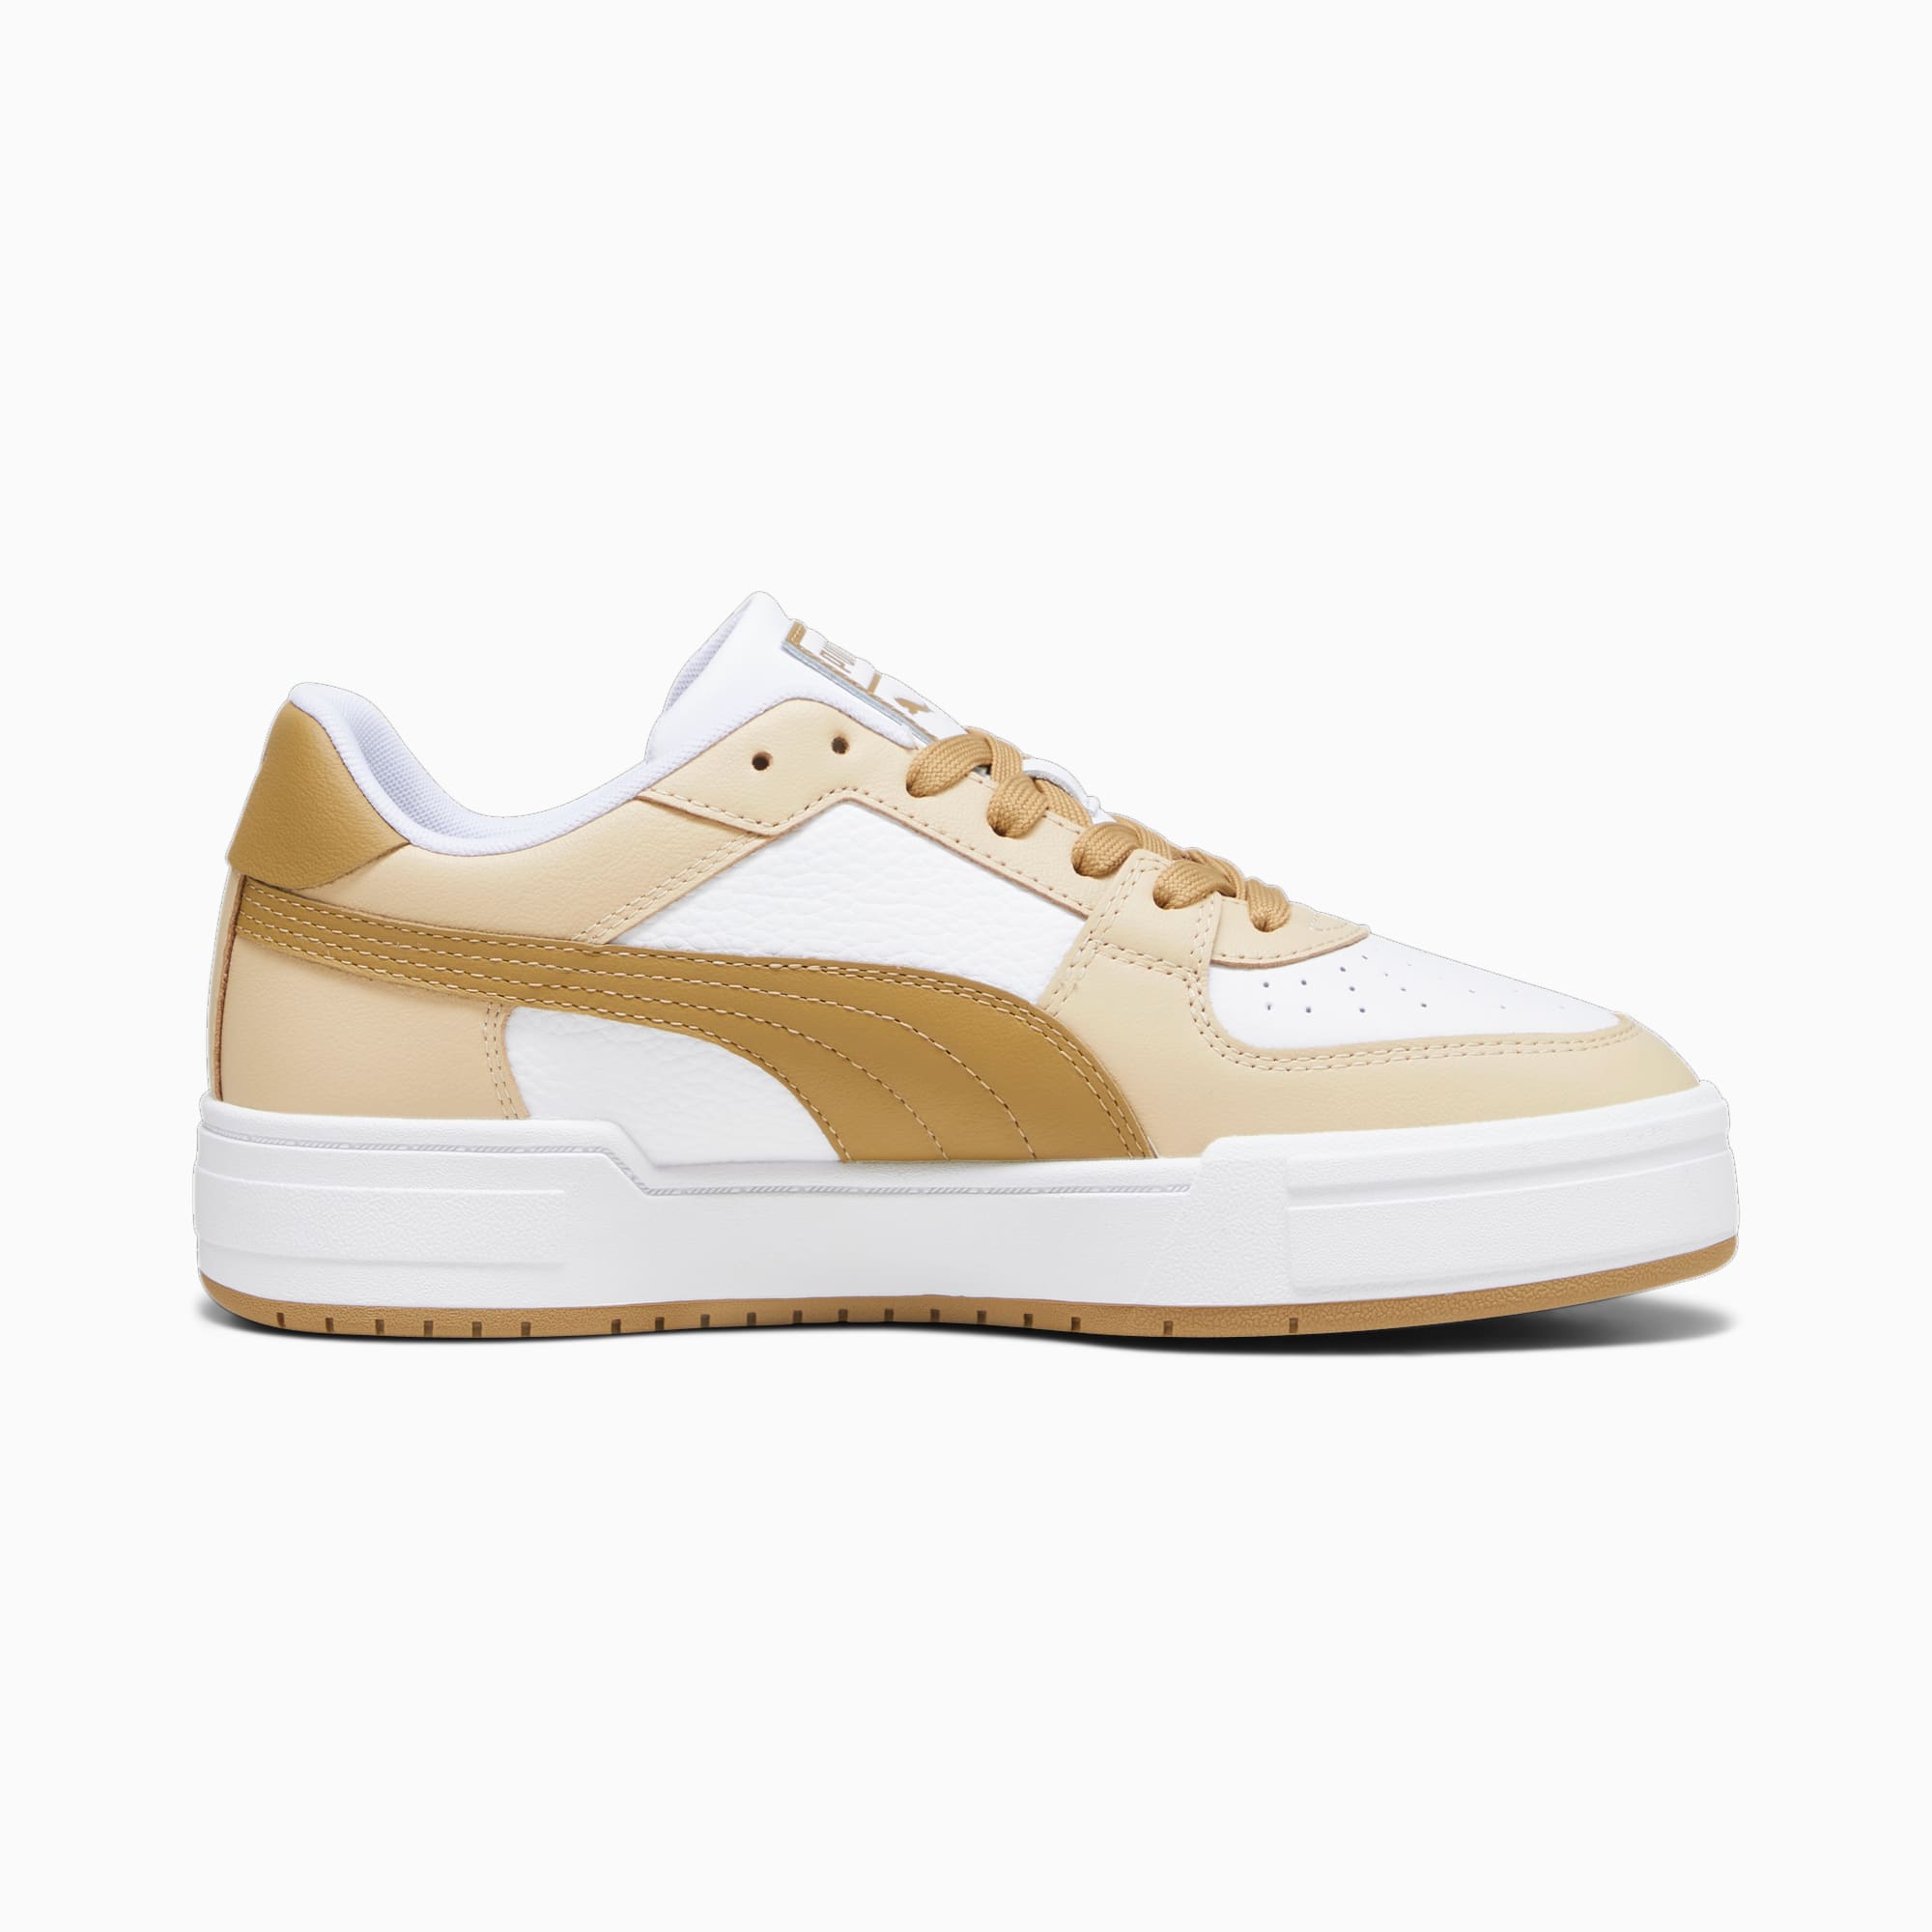 Women's PUMA Ca Pro Classic Trainers, White/Granola/Toasted, Size 39, Shoes